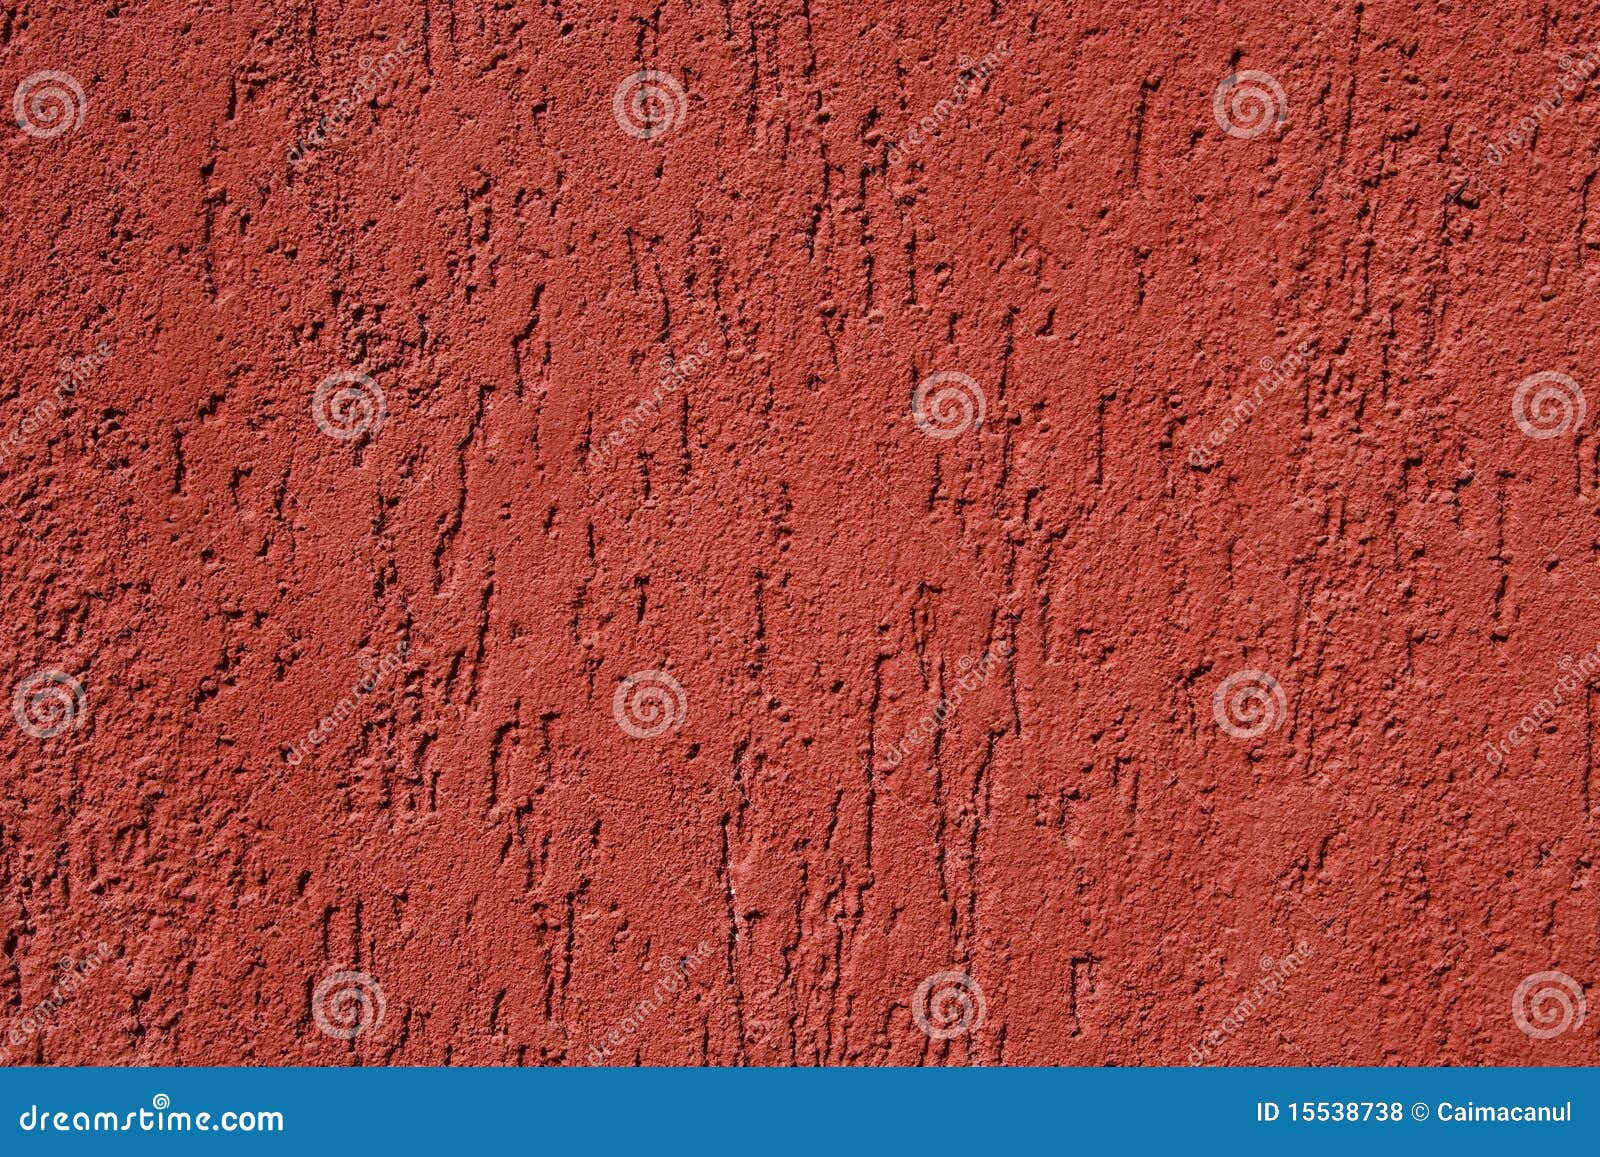 Red Cement Texture, Detail from a Wall Stock Photo - Image of natural